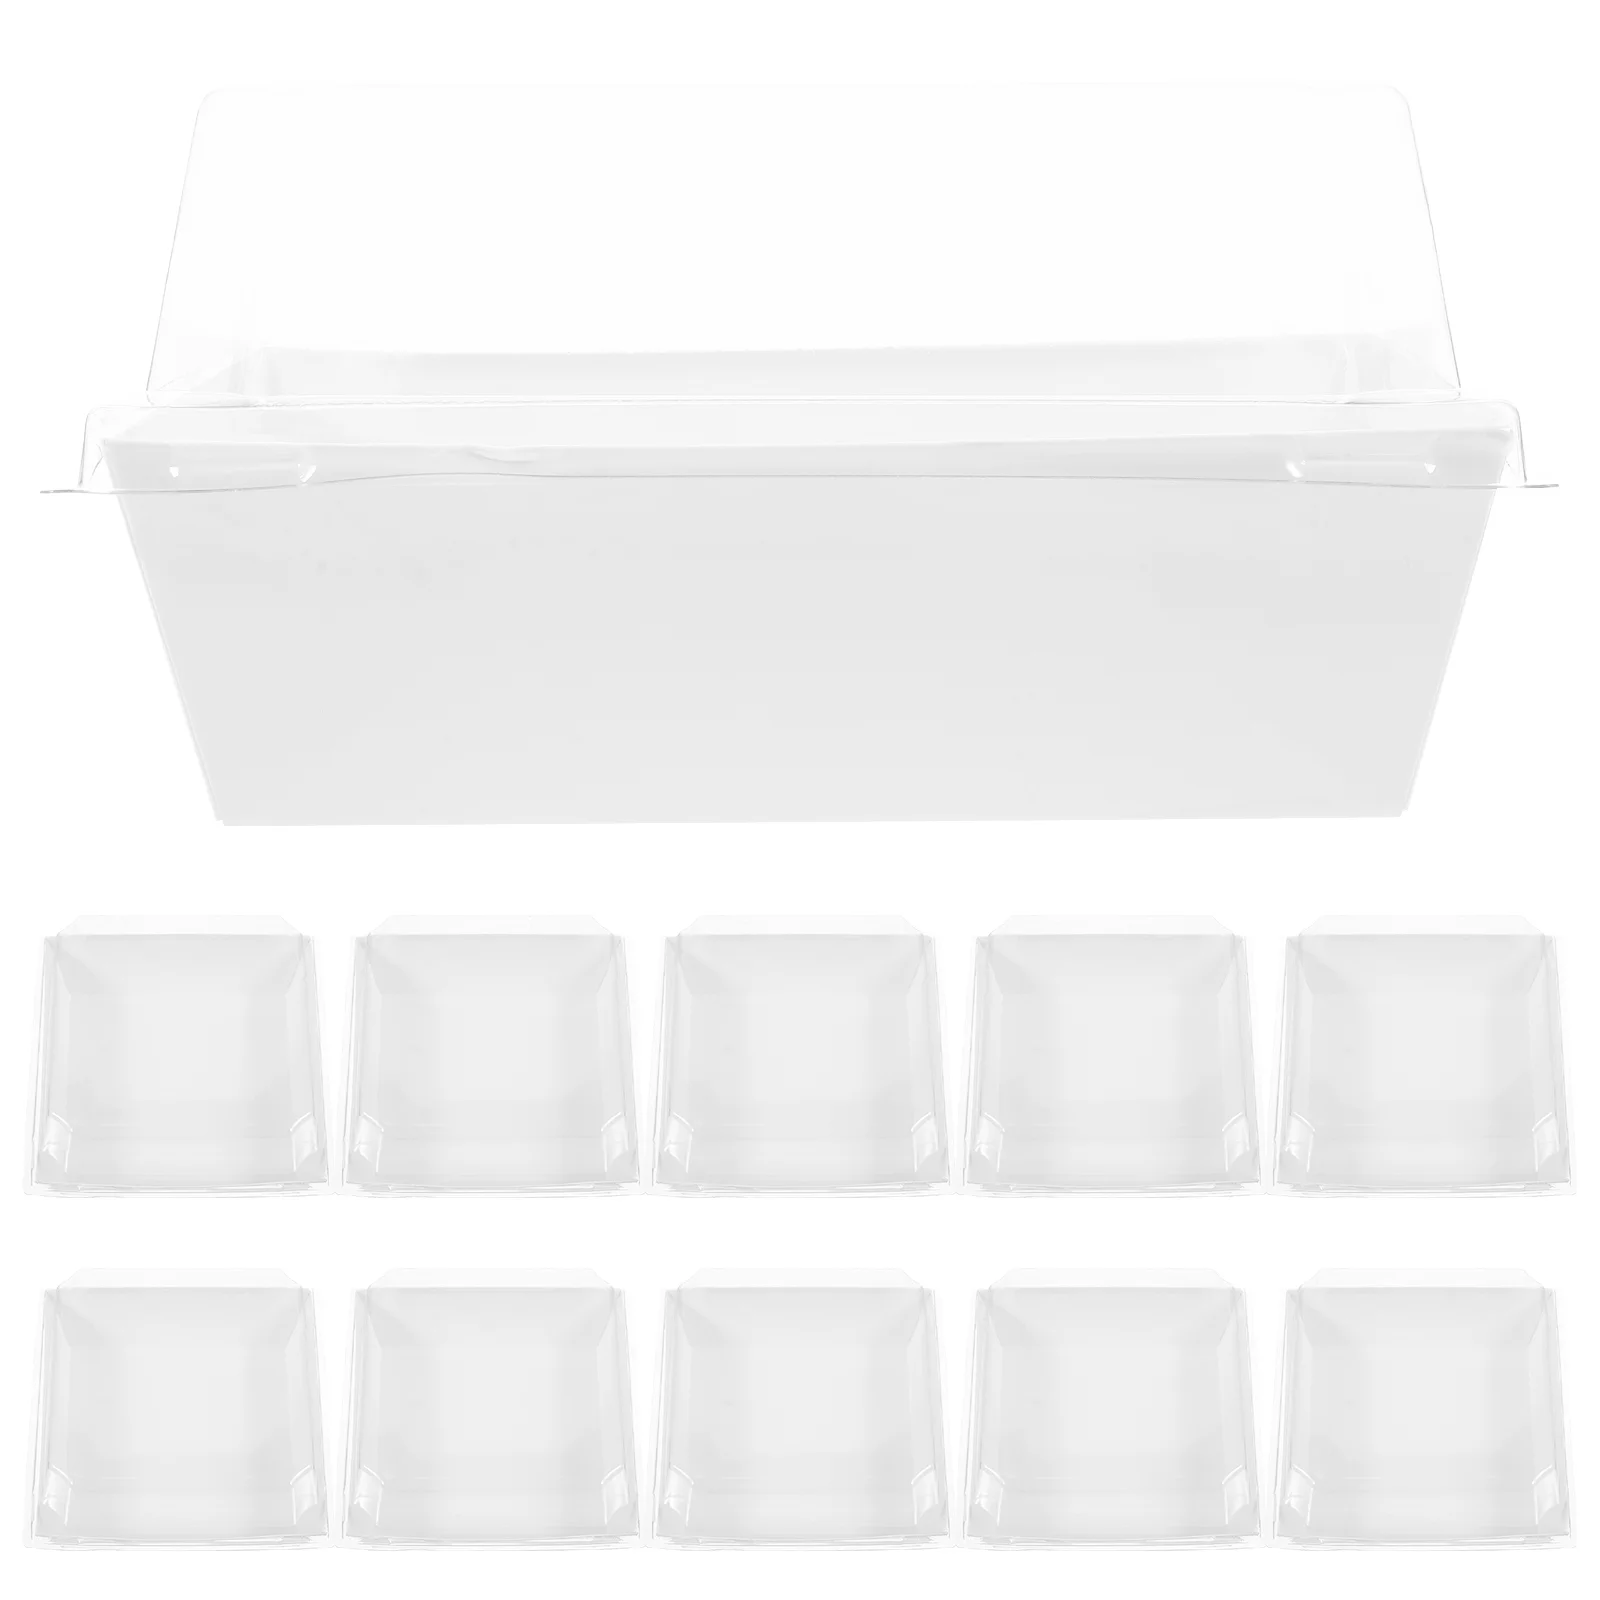 

Baking Box Packaging Clear Cake Boxes Containers with Lids Dessert Candy Party Favors Storage Cupcake Sandwich